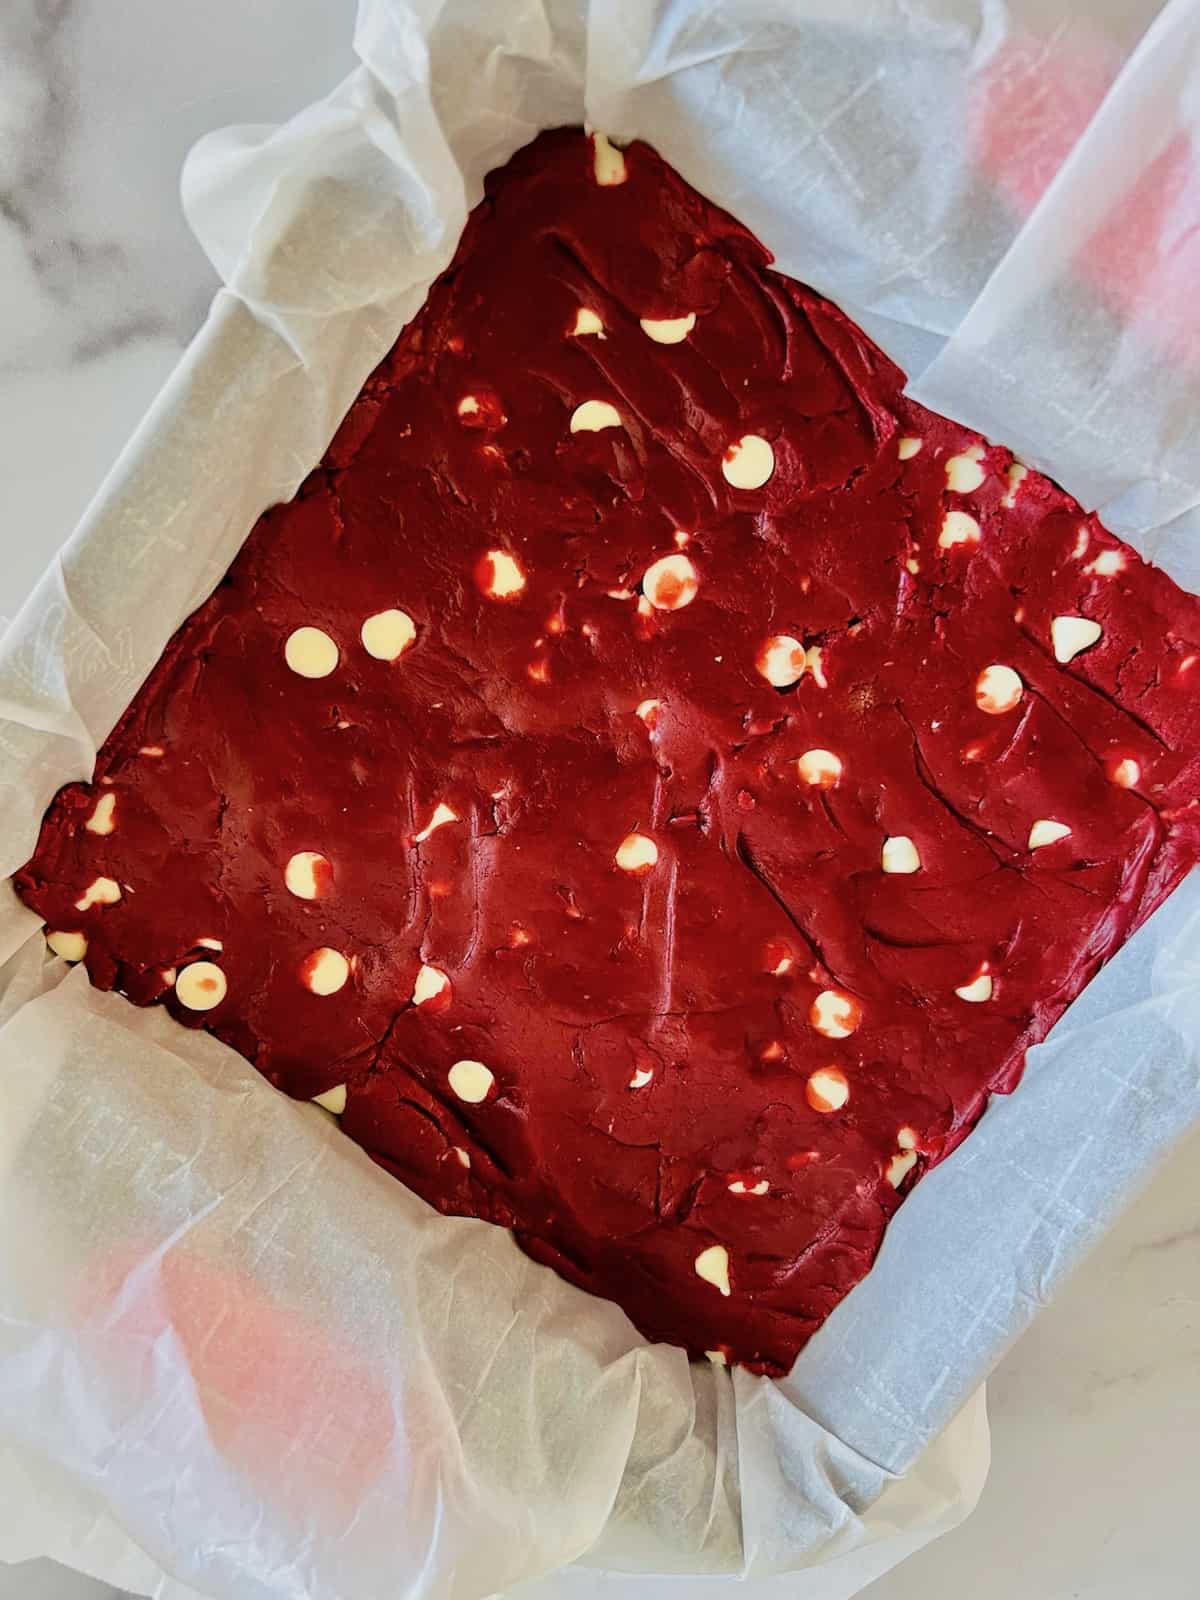 Red Velvet Brownies with Cake Mix Batter spread into the 8x8 pan.